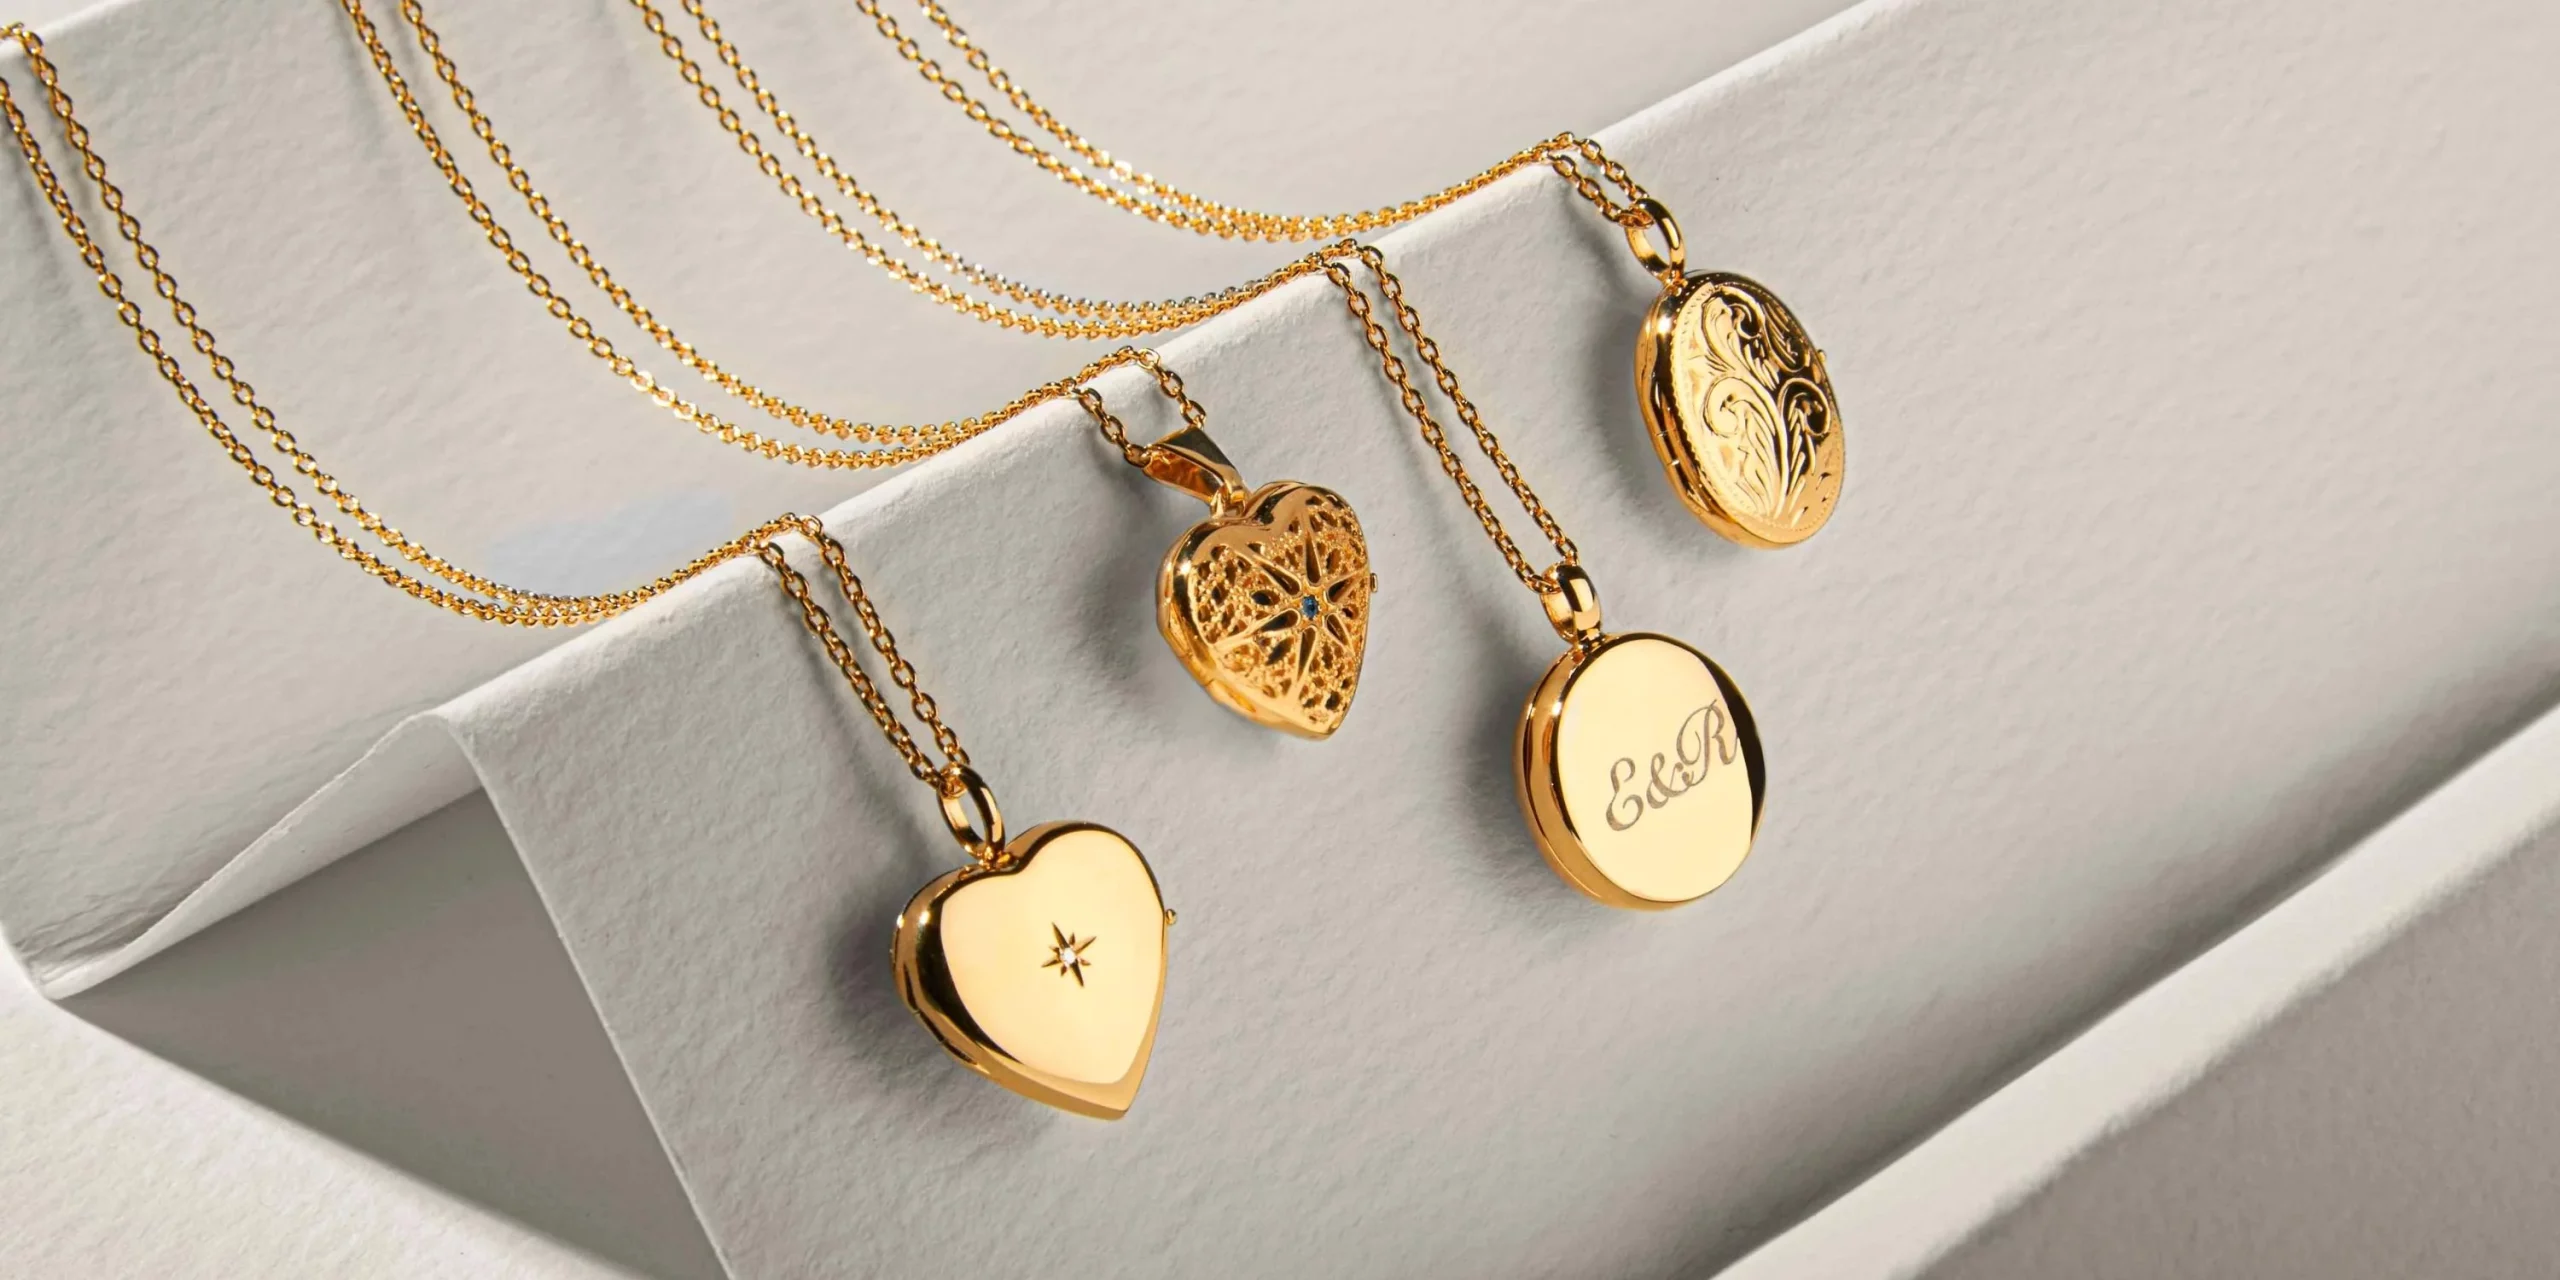 Reimagining Gold Lockets for Women for a New Generation!